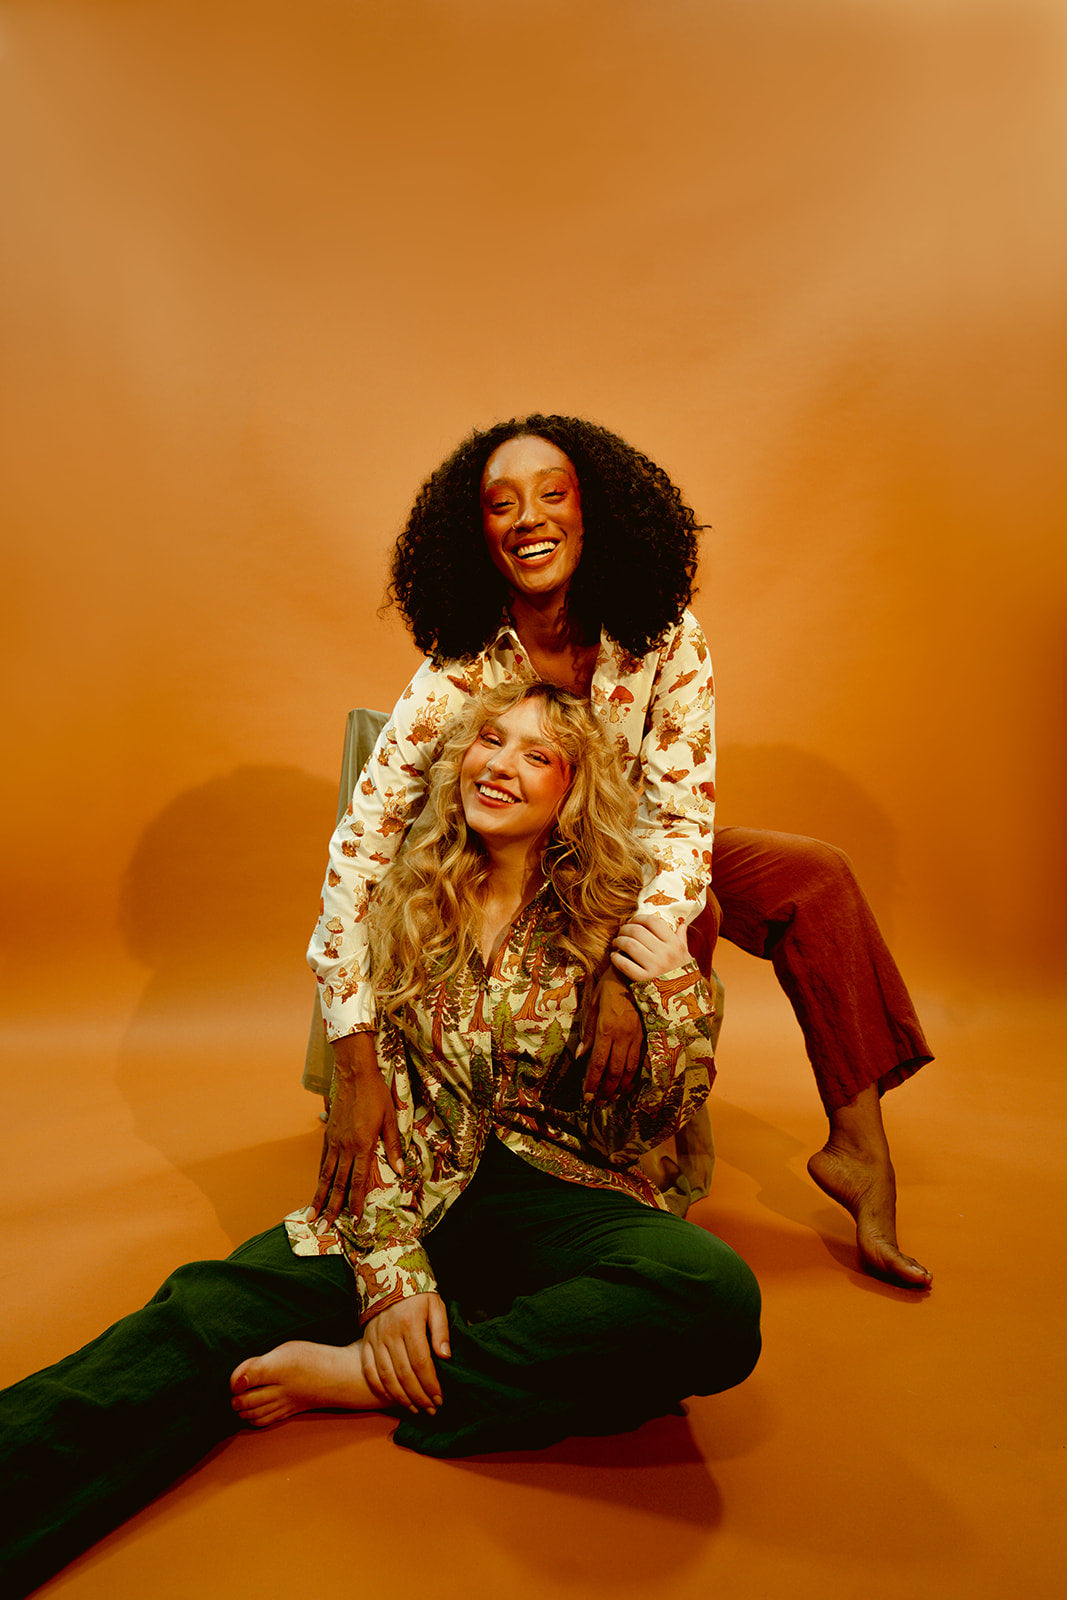 A couple of white and black women with beautiful smiles are sitting and posing for a picture. A white woman is sitting on the floor, wearing an aesthetically groovy Western-style front snap shirt cast in the beautiful greens and tans of California Redwoods. Meanwhile, a black woman wearing a Western-style front snap shirt in a groovy mushroom print sits on top of her against a brown wall.